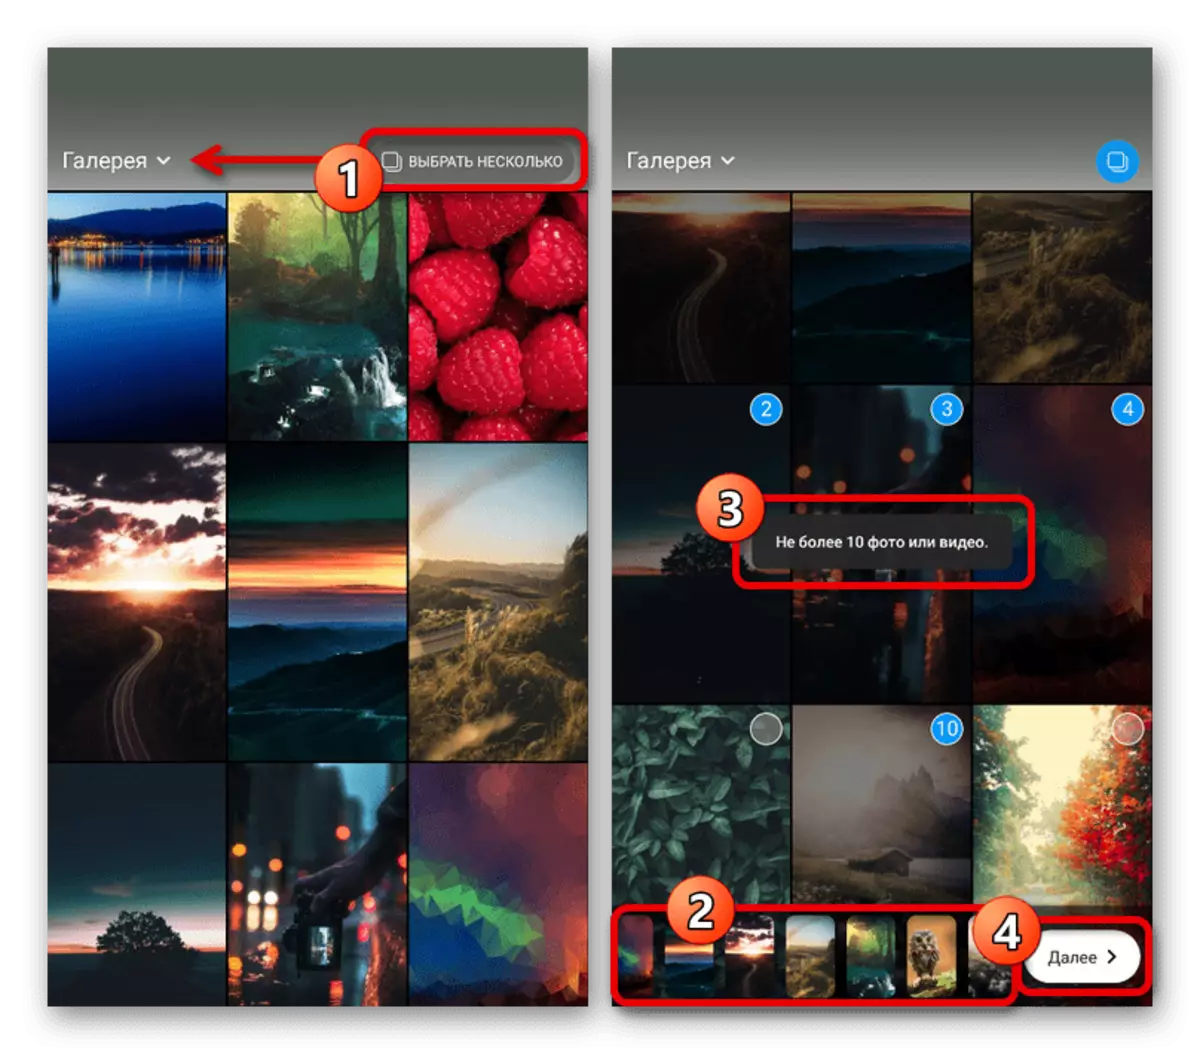 Select multiple photos for the story in the application Instagram